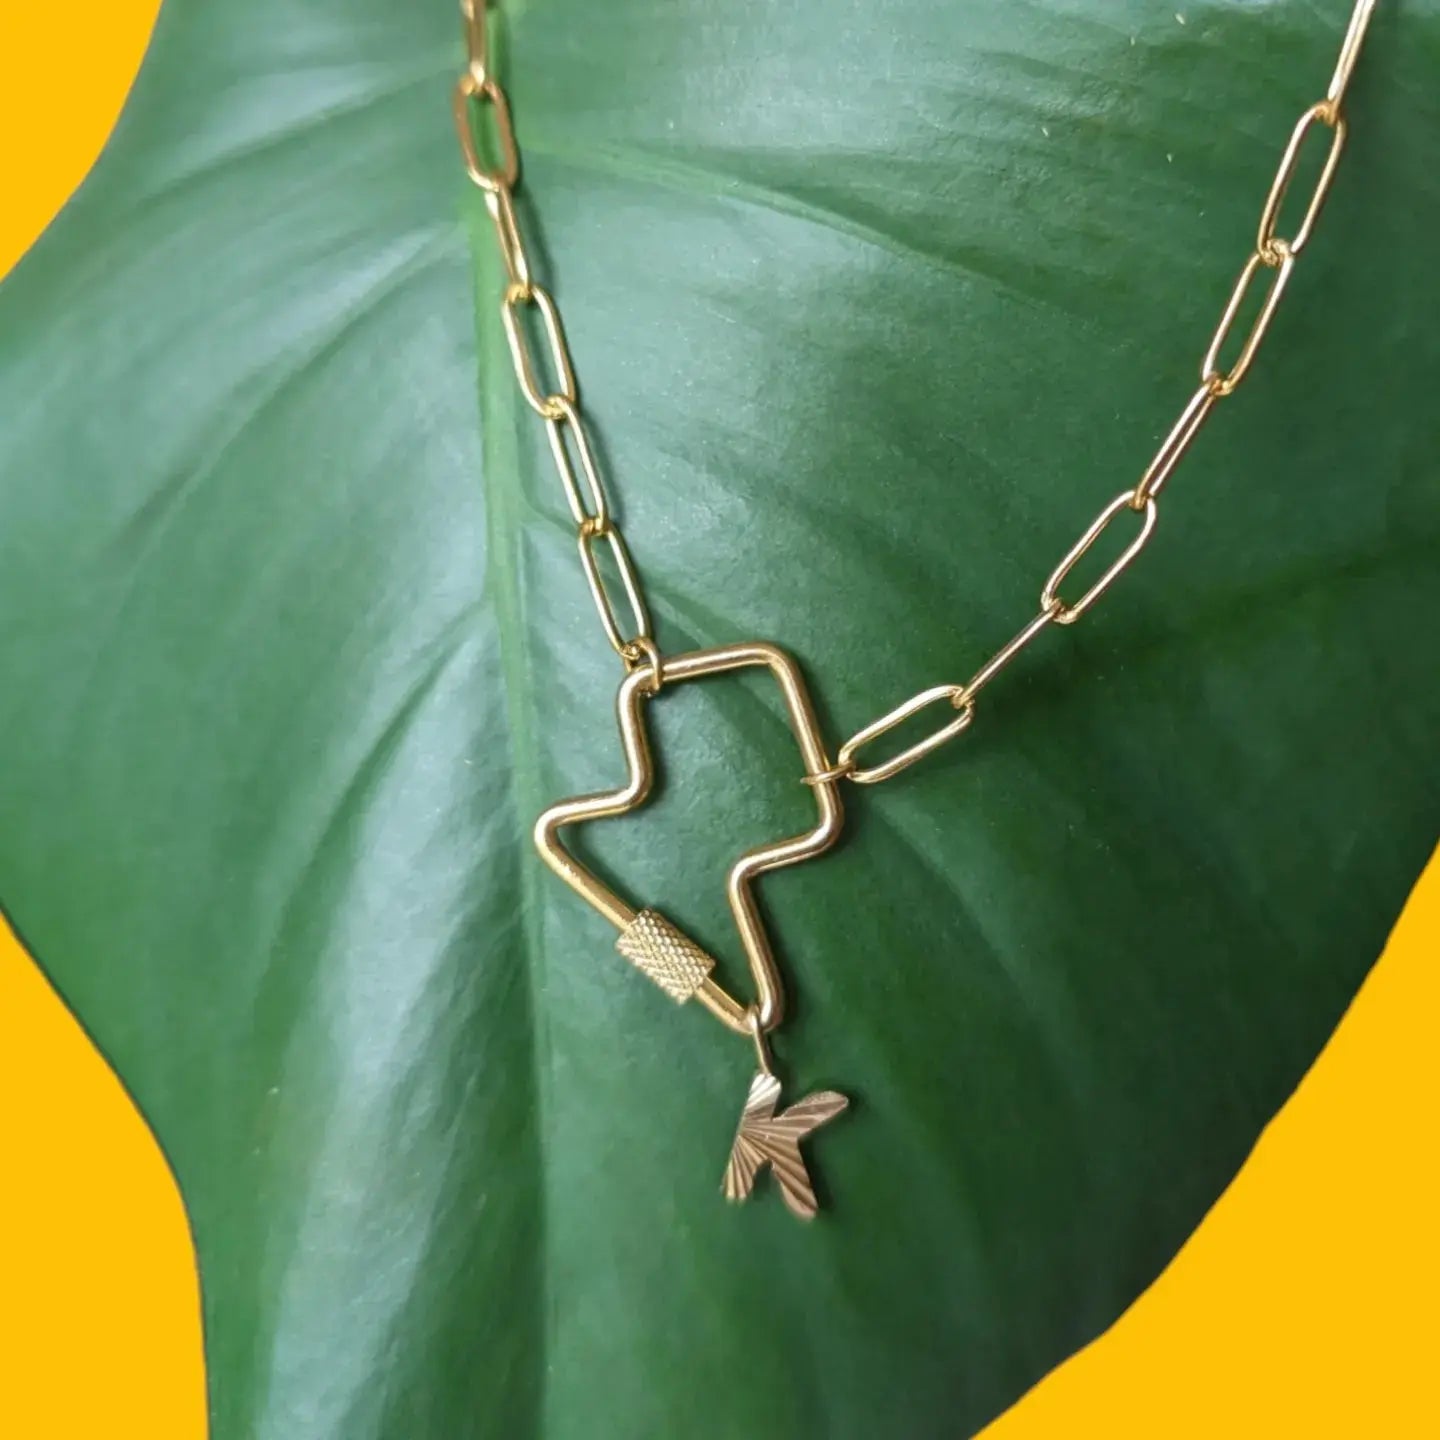 Lightning bolt charm collector necklace Trend Tonic